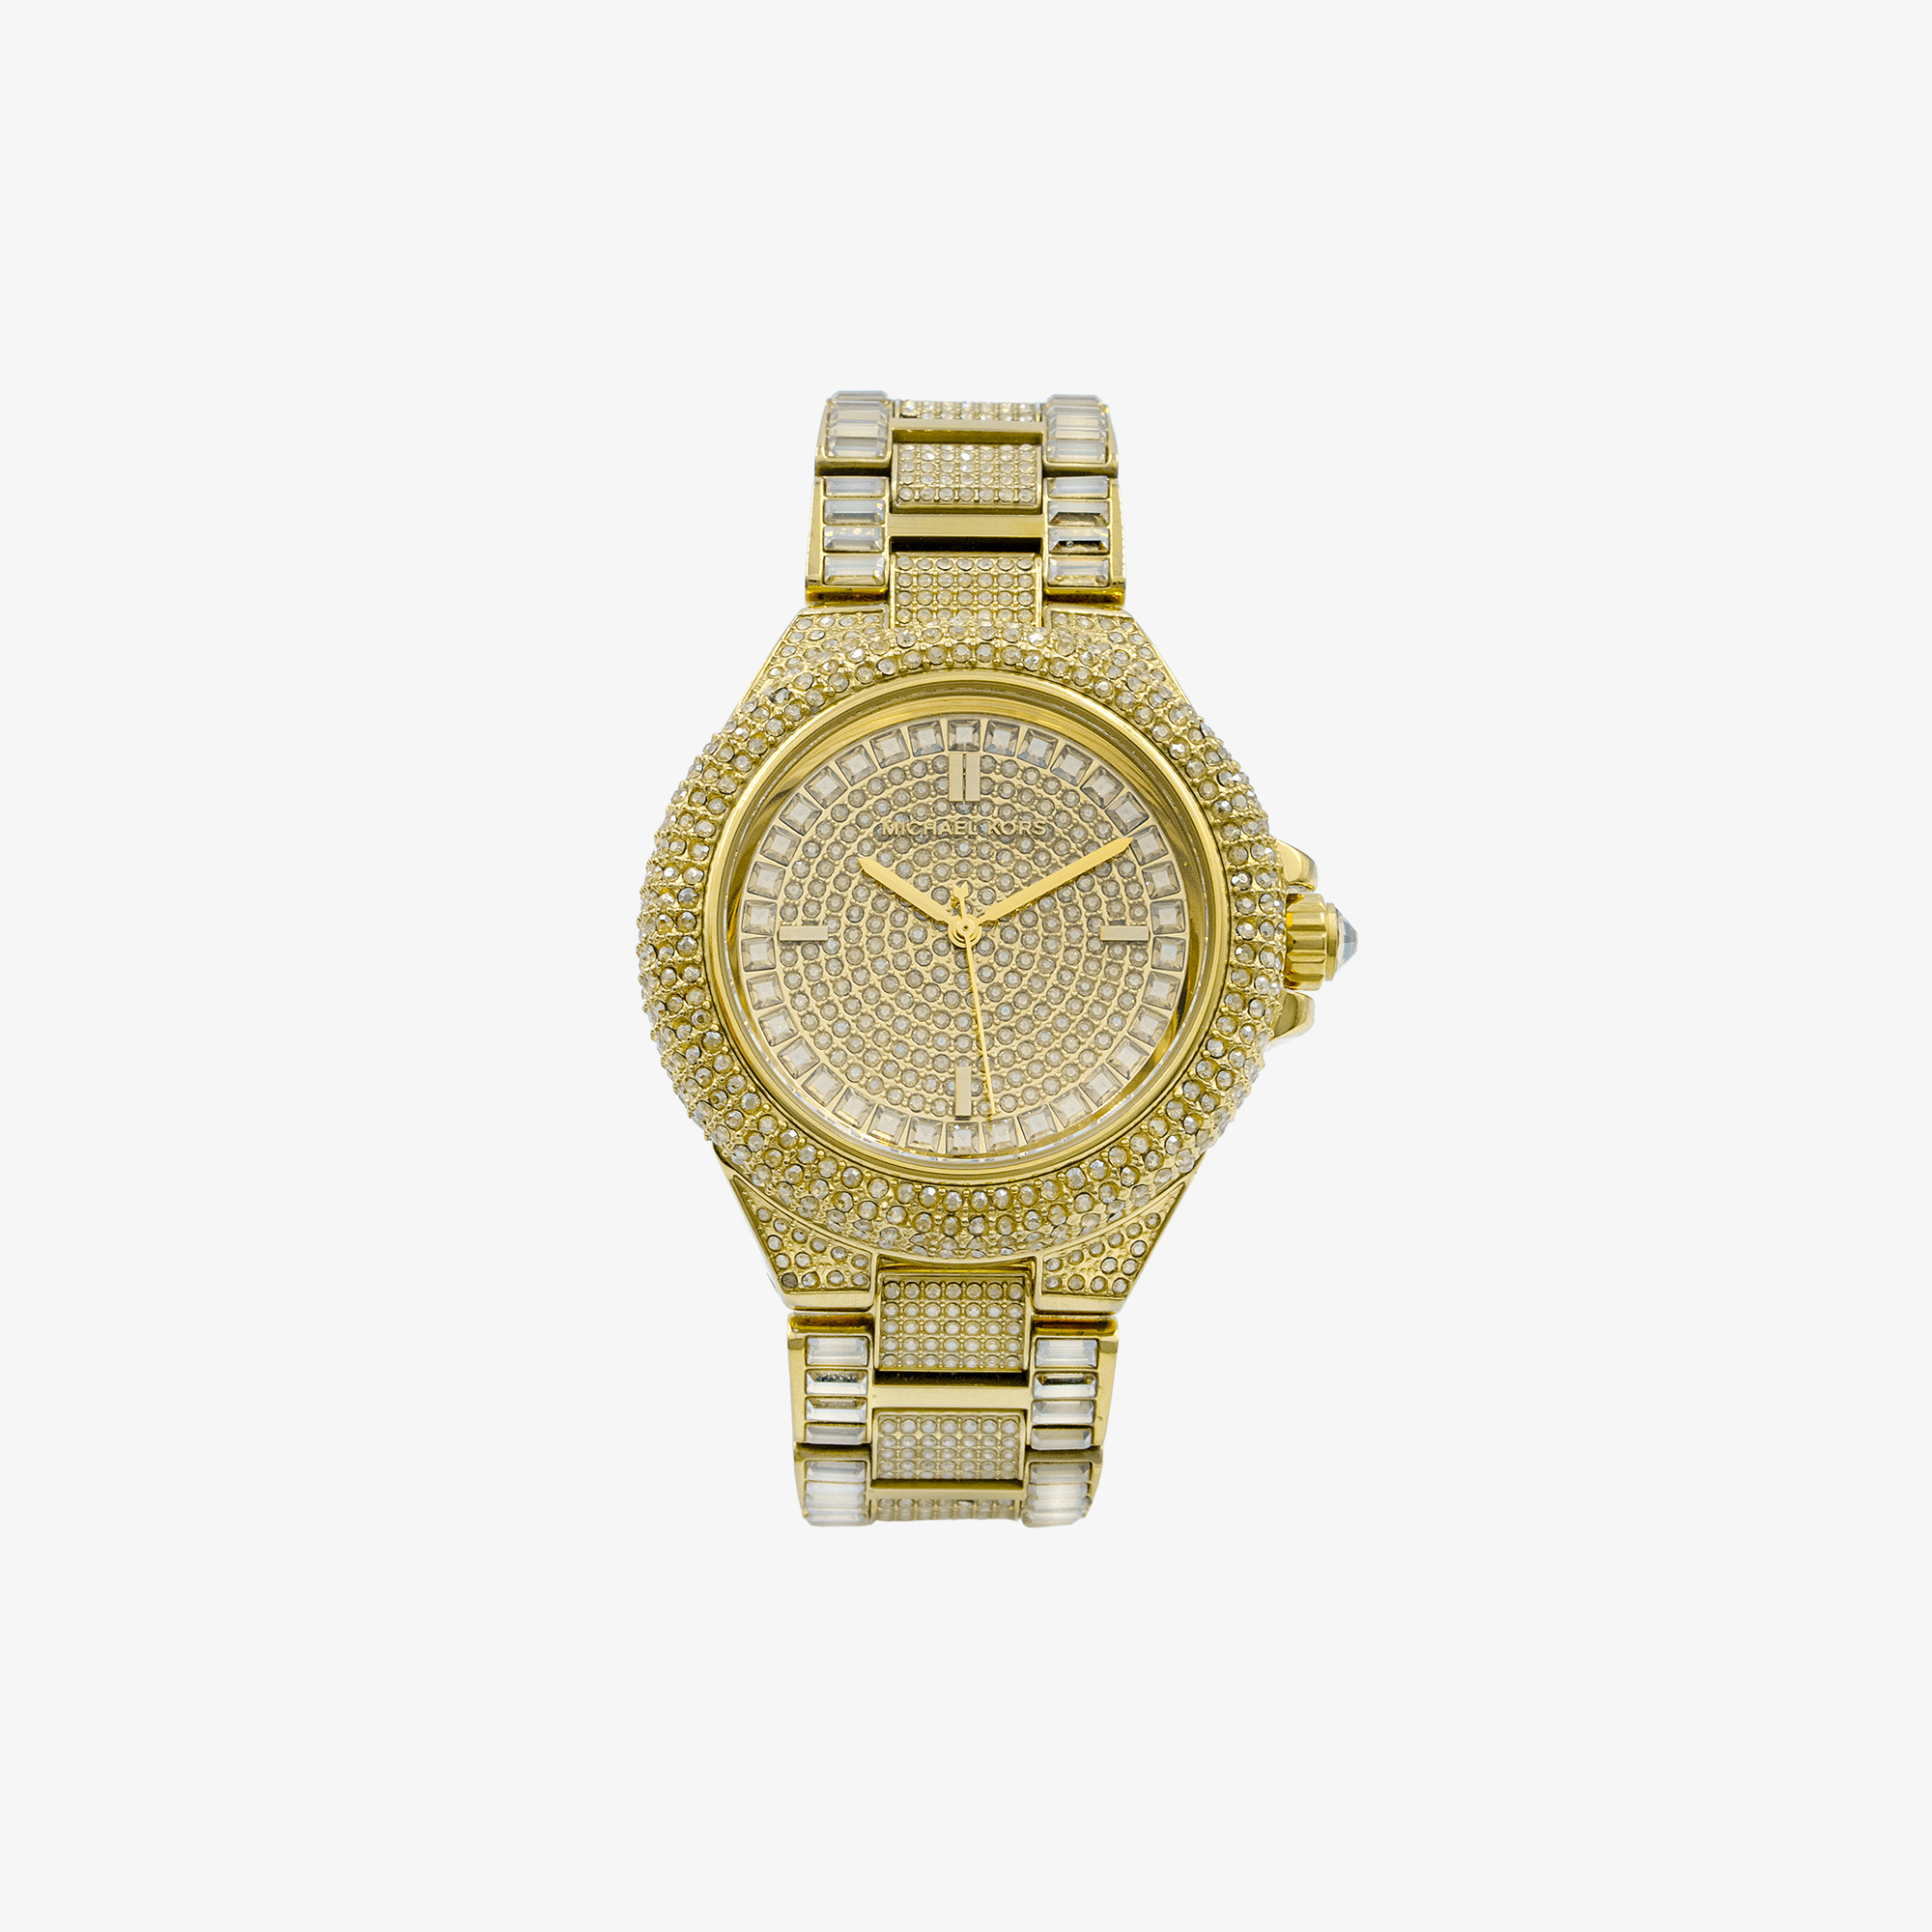 MICHAEL KORS CAMILLE GOLD TONE WATCH